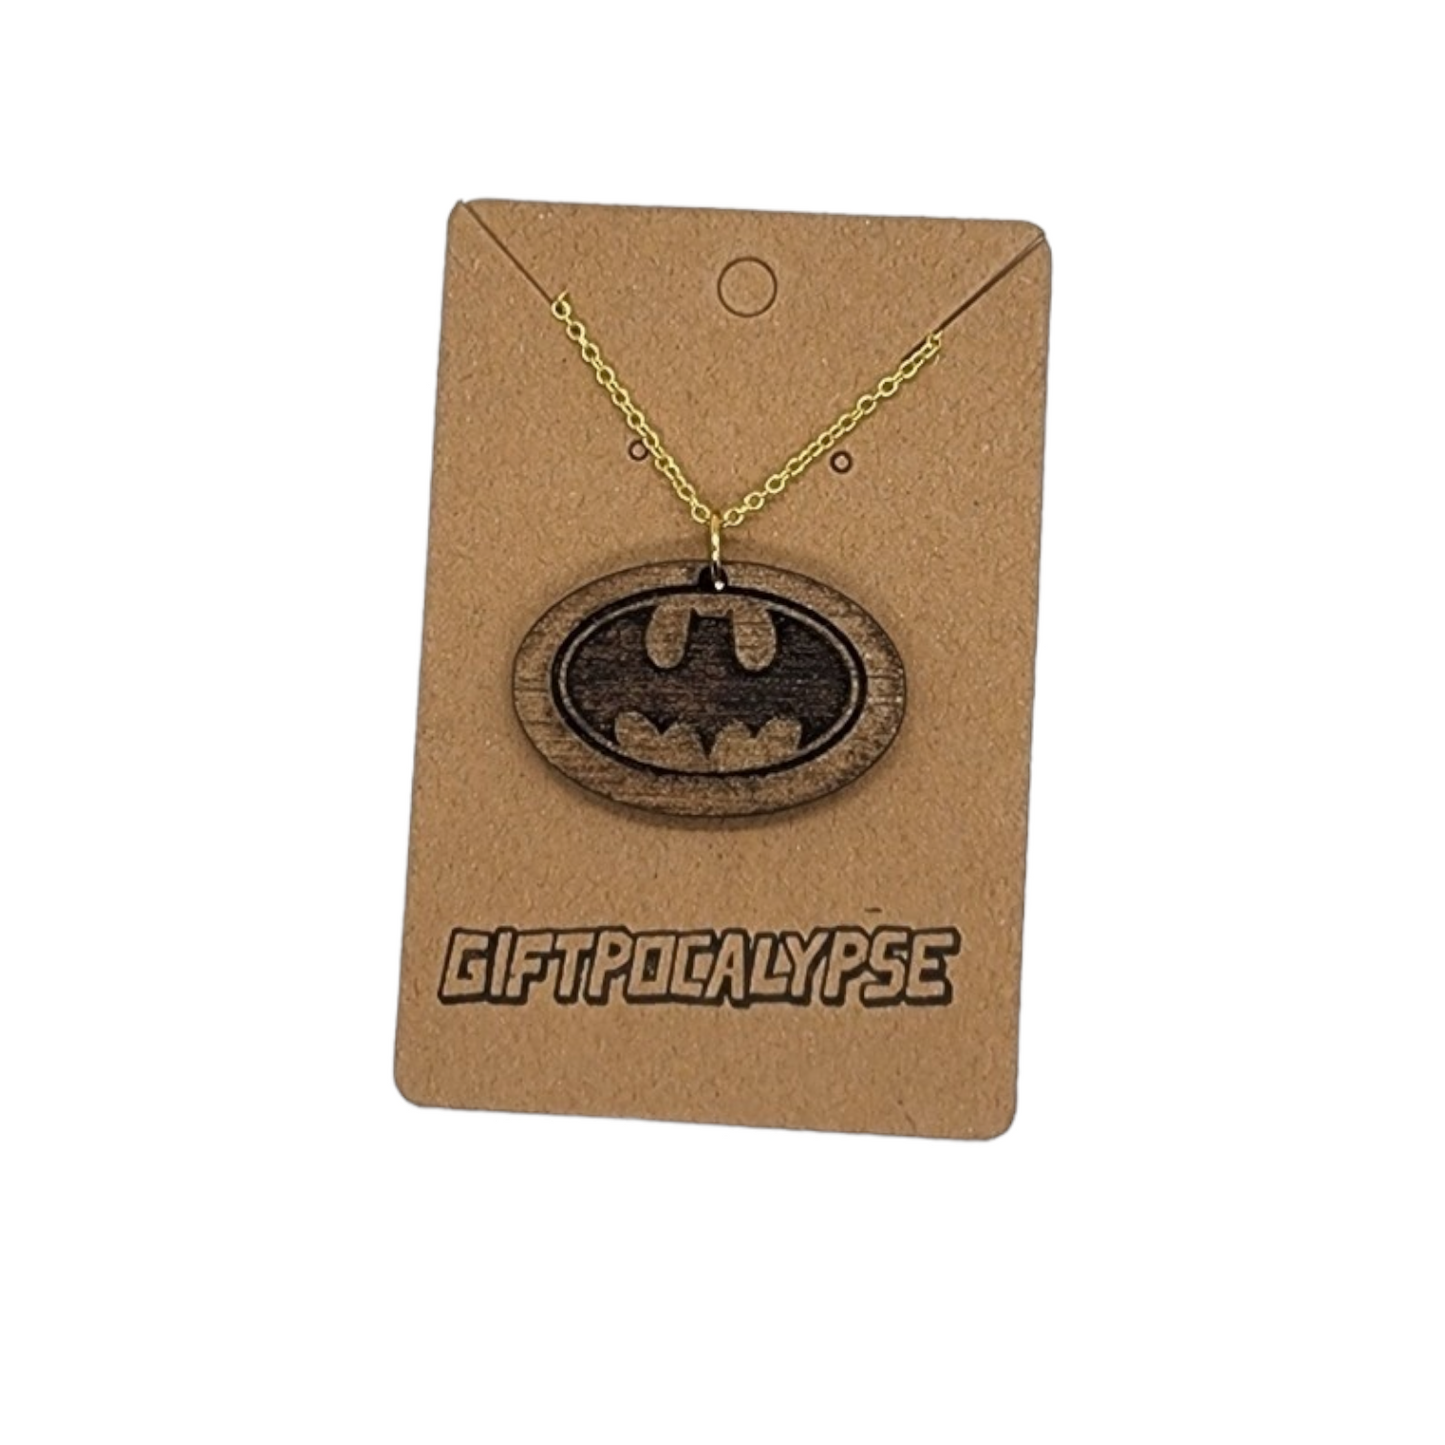 Batman Symbol Design Wood Painted/Stained Necklace Handmade Laser Cut/Engraved